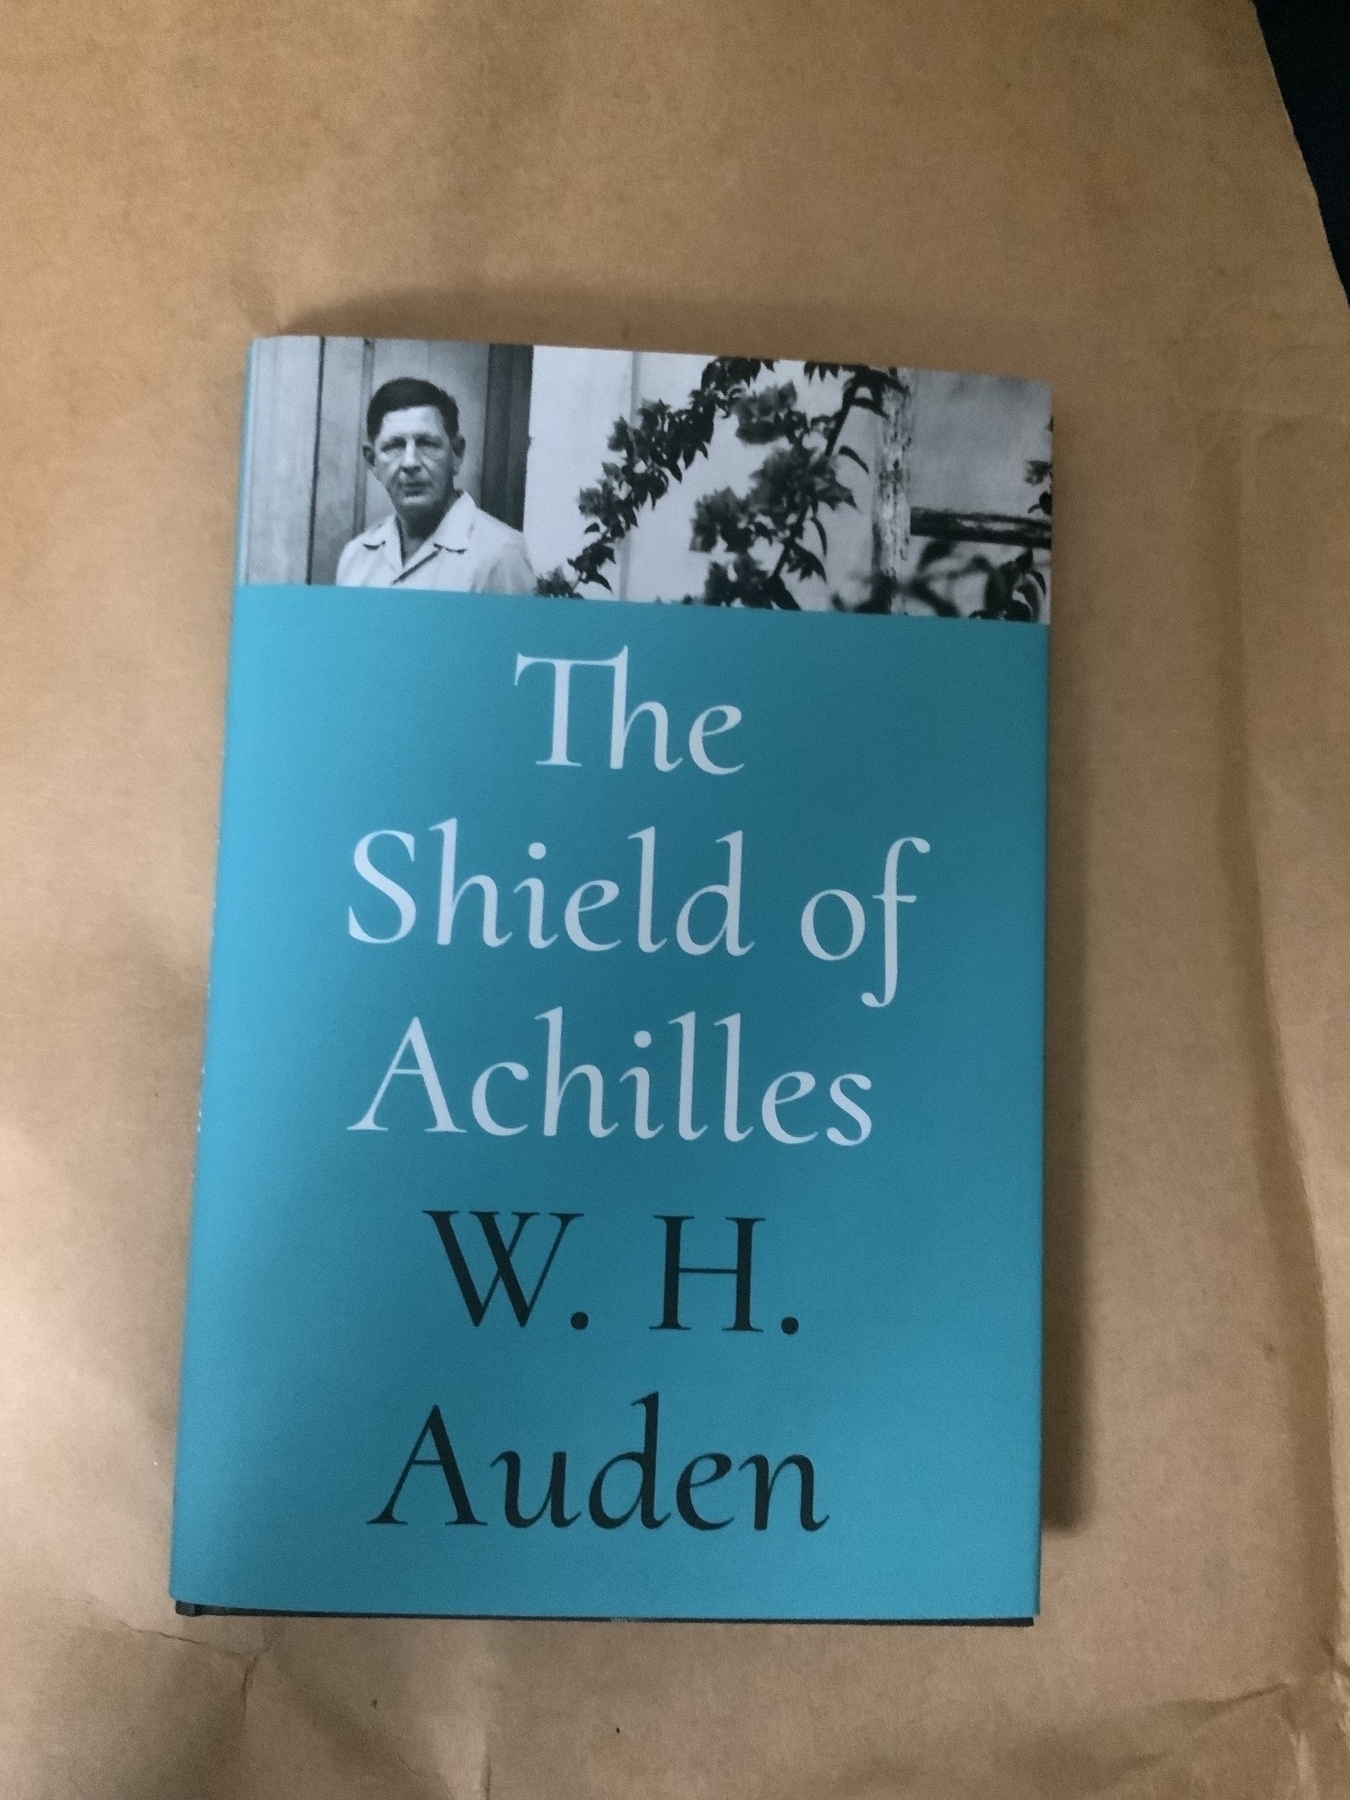 Photo of W. H. Auden’s Shield of Achilles, a new edition published in 2024.